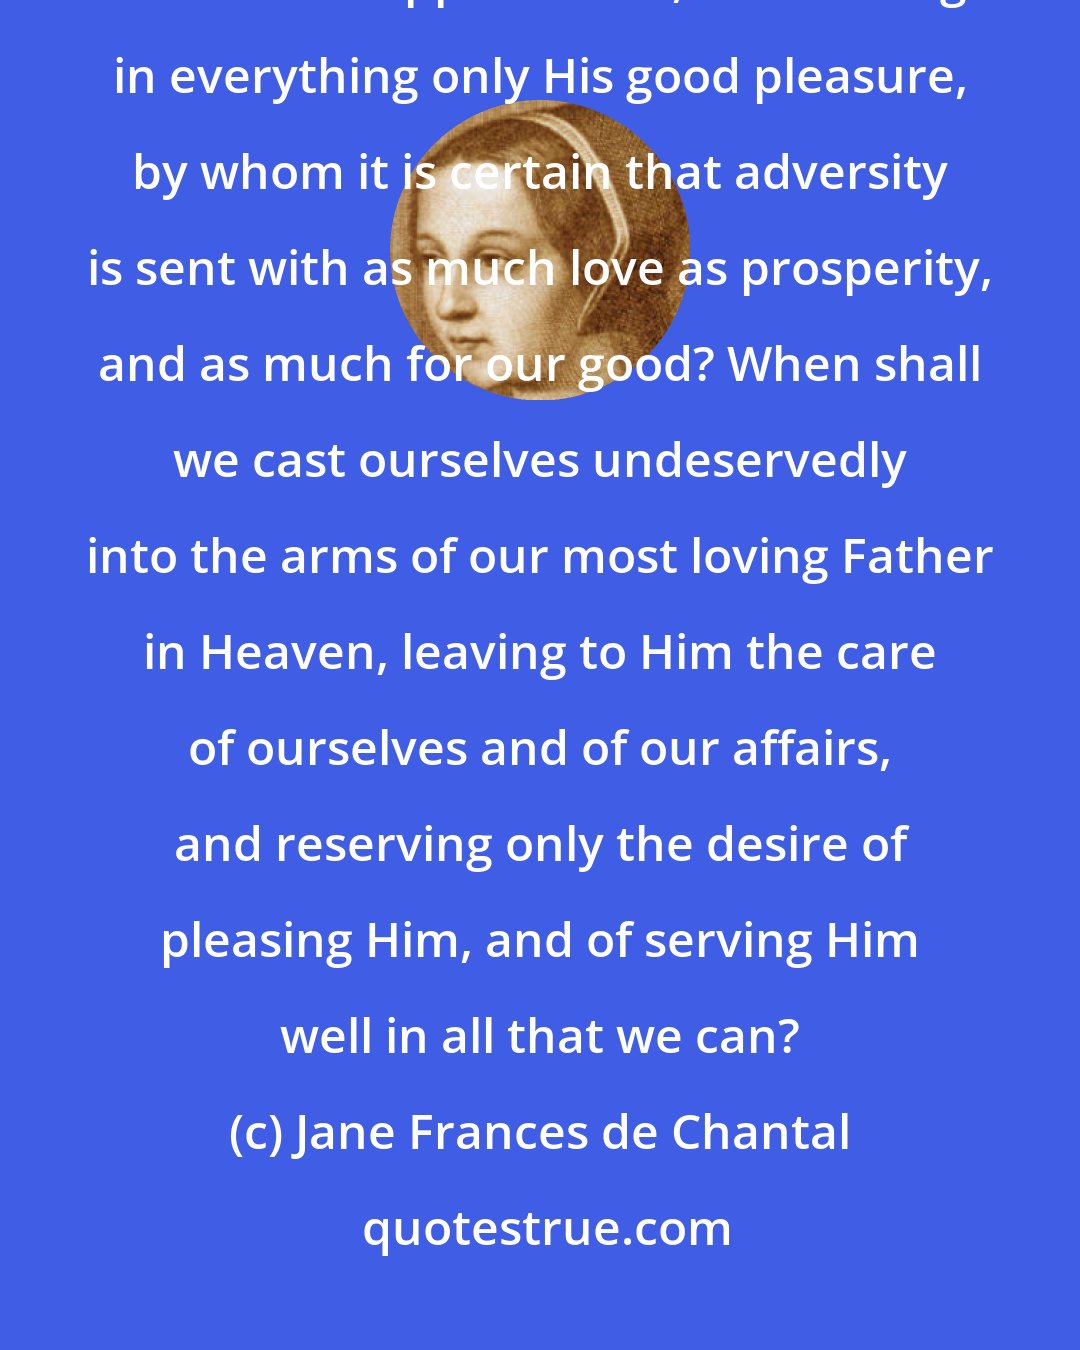 Jane Frances de Chantal: When shall it be that we shall taste the sweetness of the Divine Will in all that happens to us, considering in everything only His good pleasure, by whom it is certain that adversity is sent with as much love as prosperity, and as much for our good? When shall we cast ourselves undeservedly into the arms of our most loving Father in Heaven, leaving to Him the care of ourselves and of our affairs, and reserving only the desire of pleasing Him, and of serving Him well in all that we can?